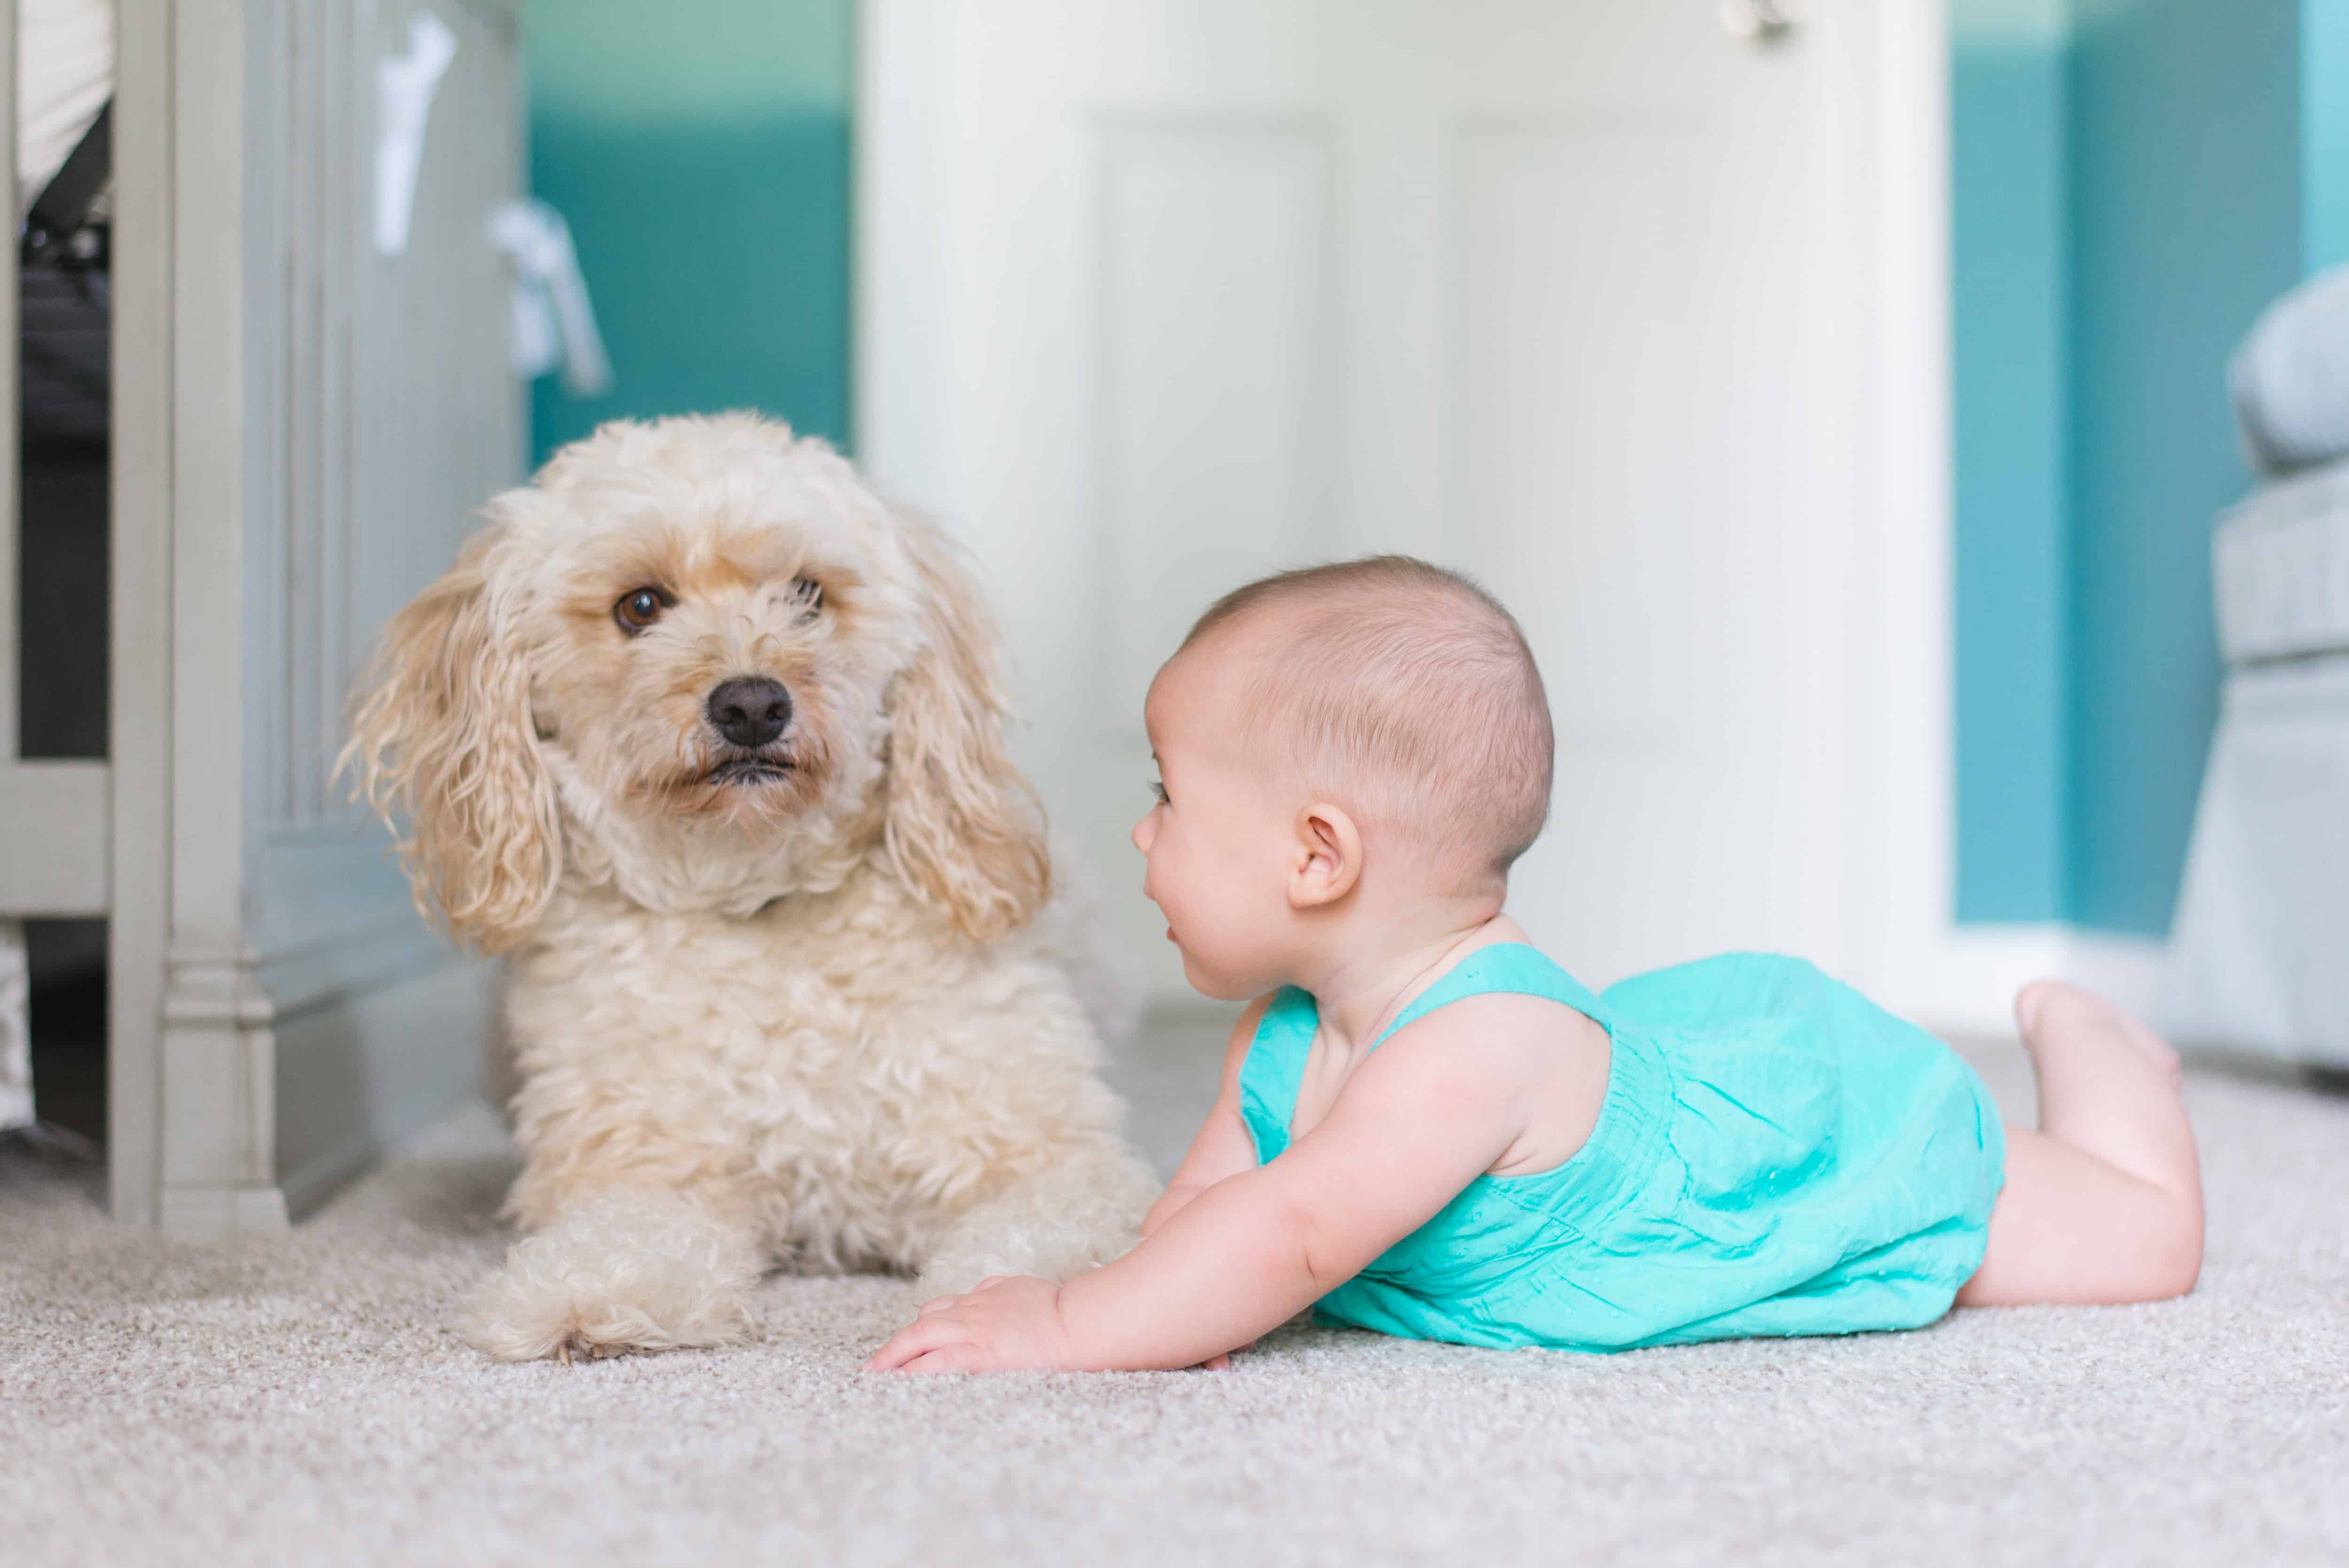 Dog with a small baby in a family living room - How Important Is Socialization To Your Canine Friend?